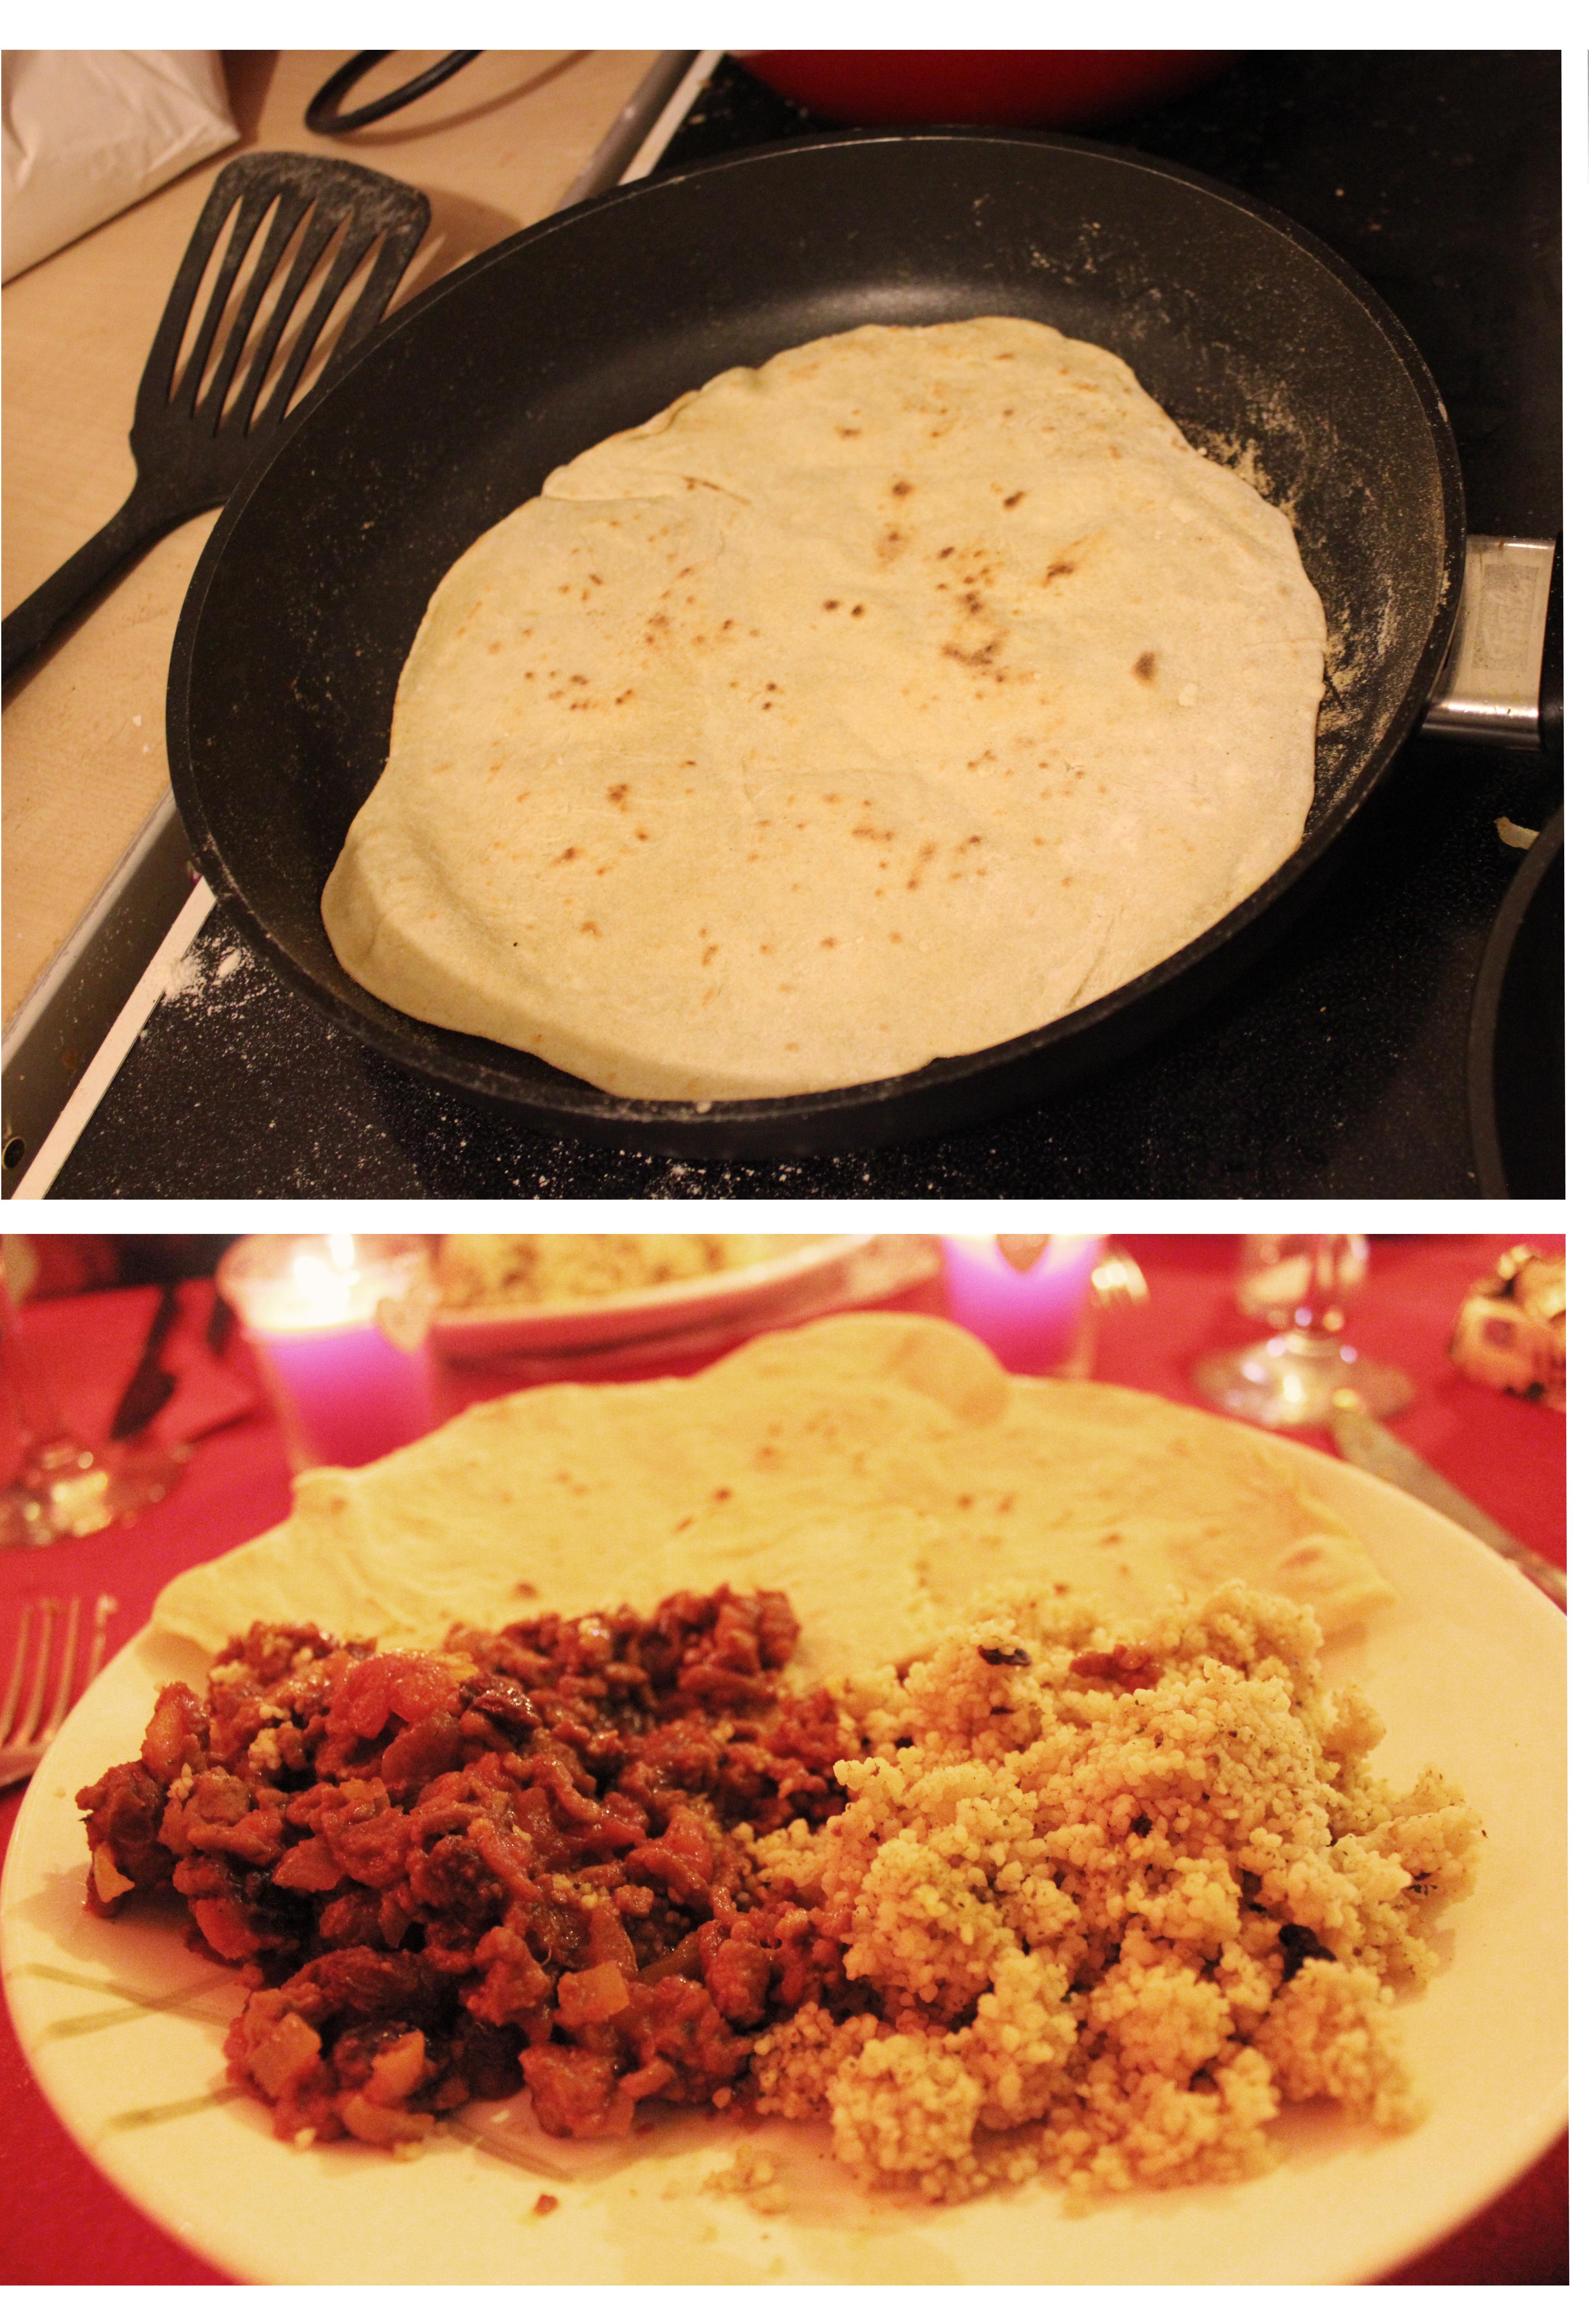 pieday friday recipe - how to make a lamb tagine and tortilla bread